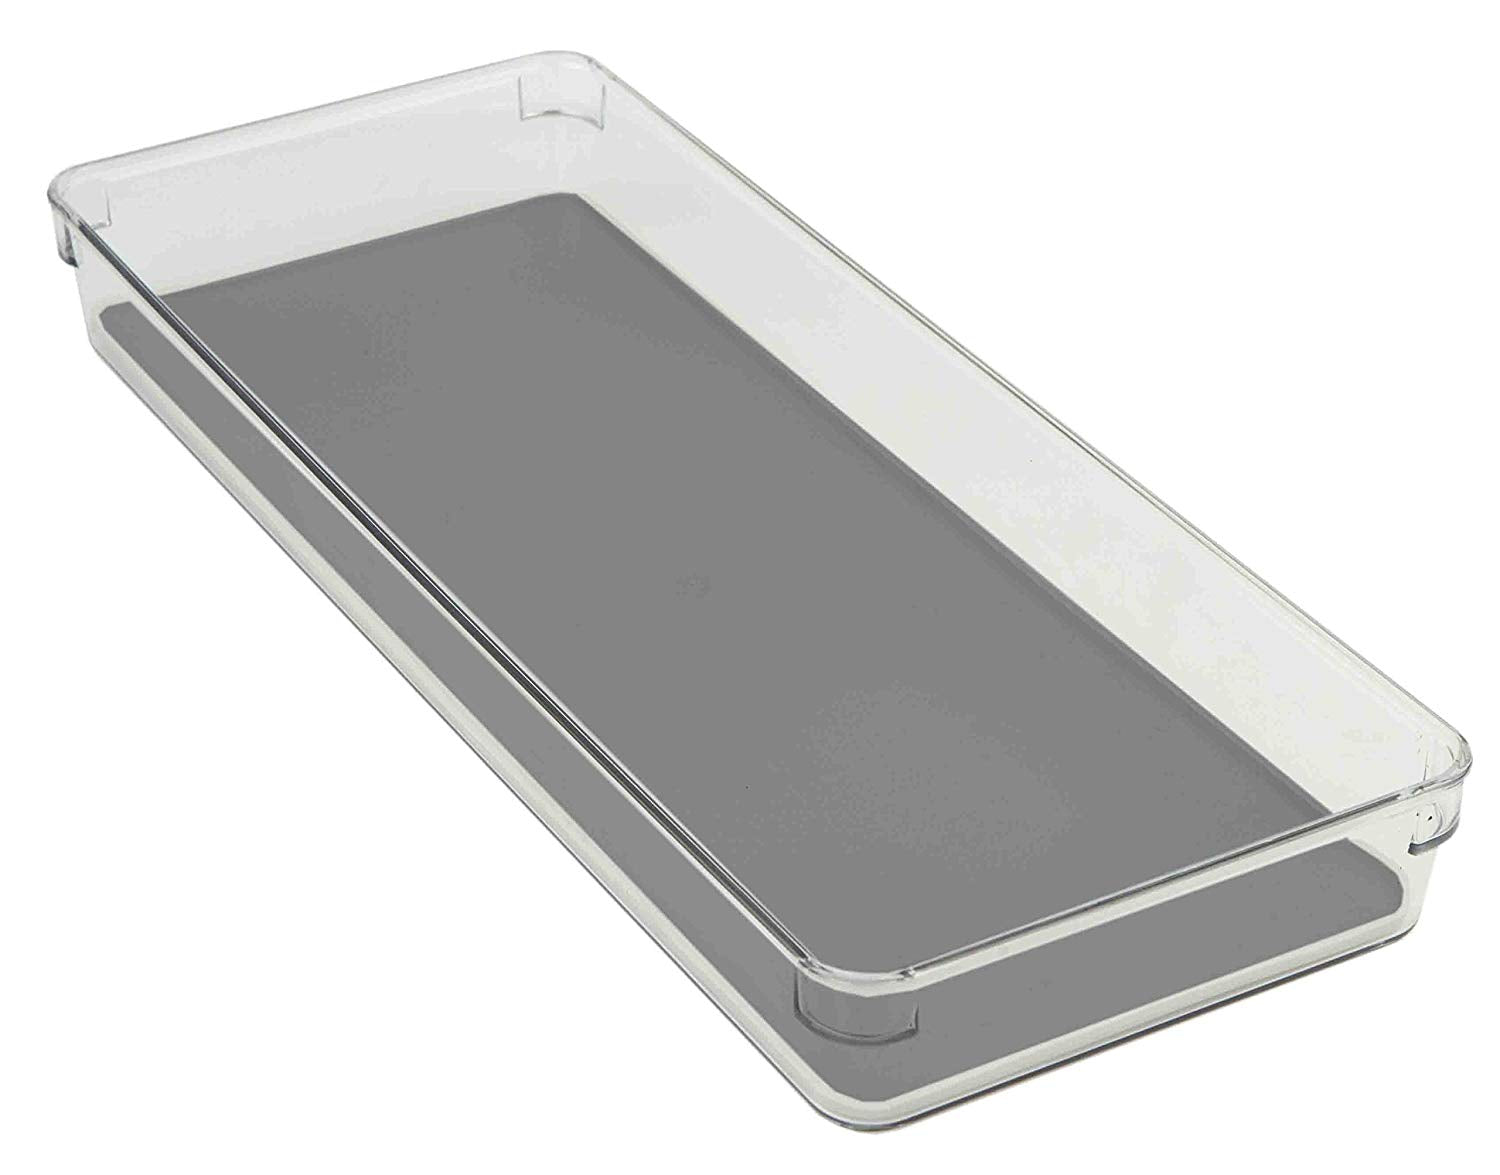 Home Basics PB49746 6" x 15" x 2" Plastic Rubber Liner Drawer Organizer, One Size, Clear